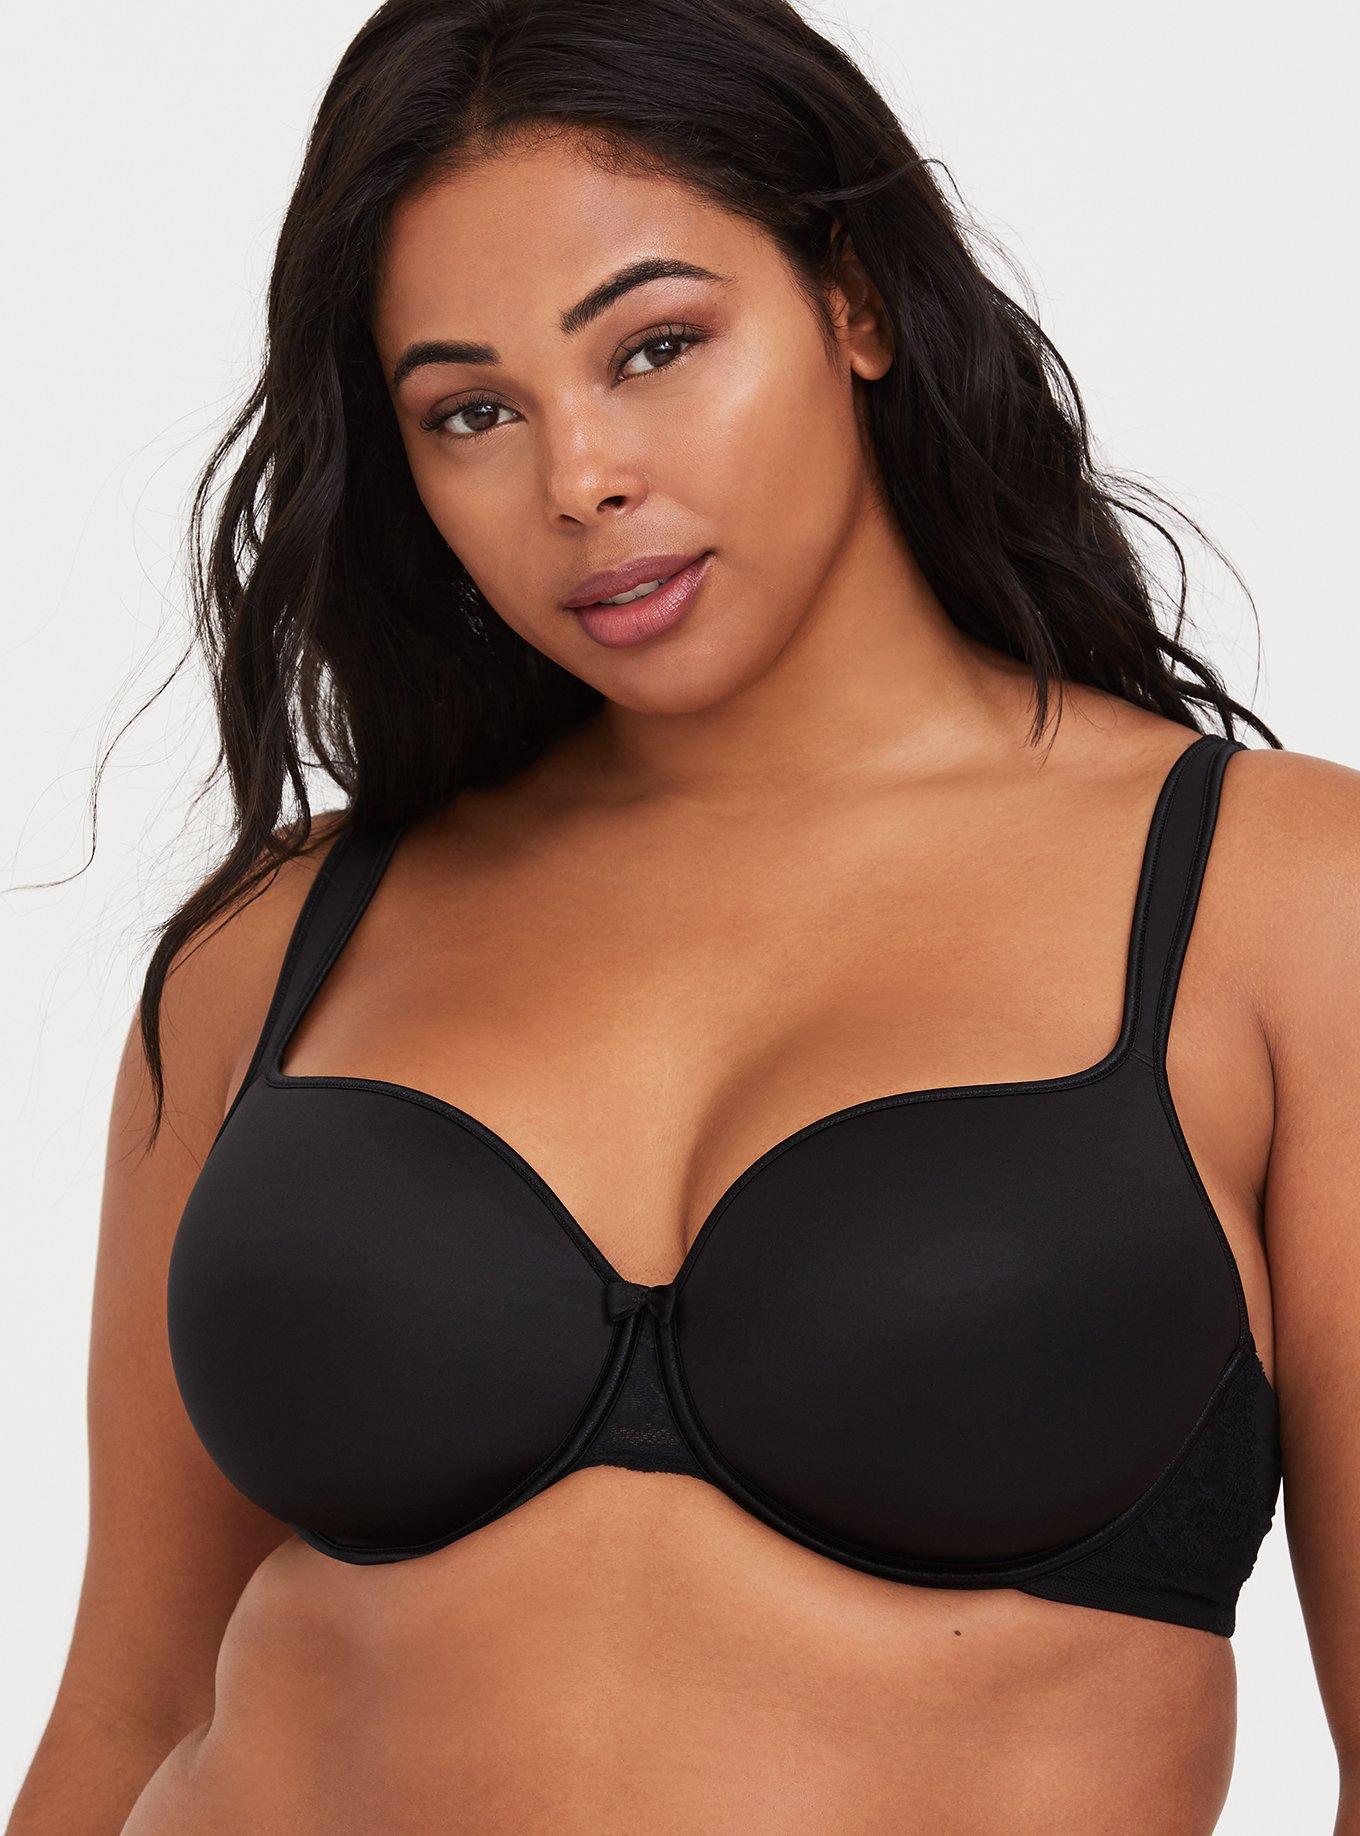 THE BEST PLUS-SIZE BRAS EVER!!! *HONEST REVIEW* TORRID Bras Try-on Haul (42F)